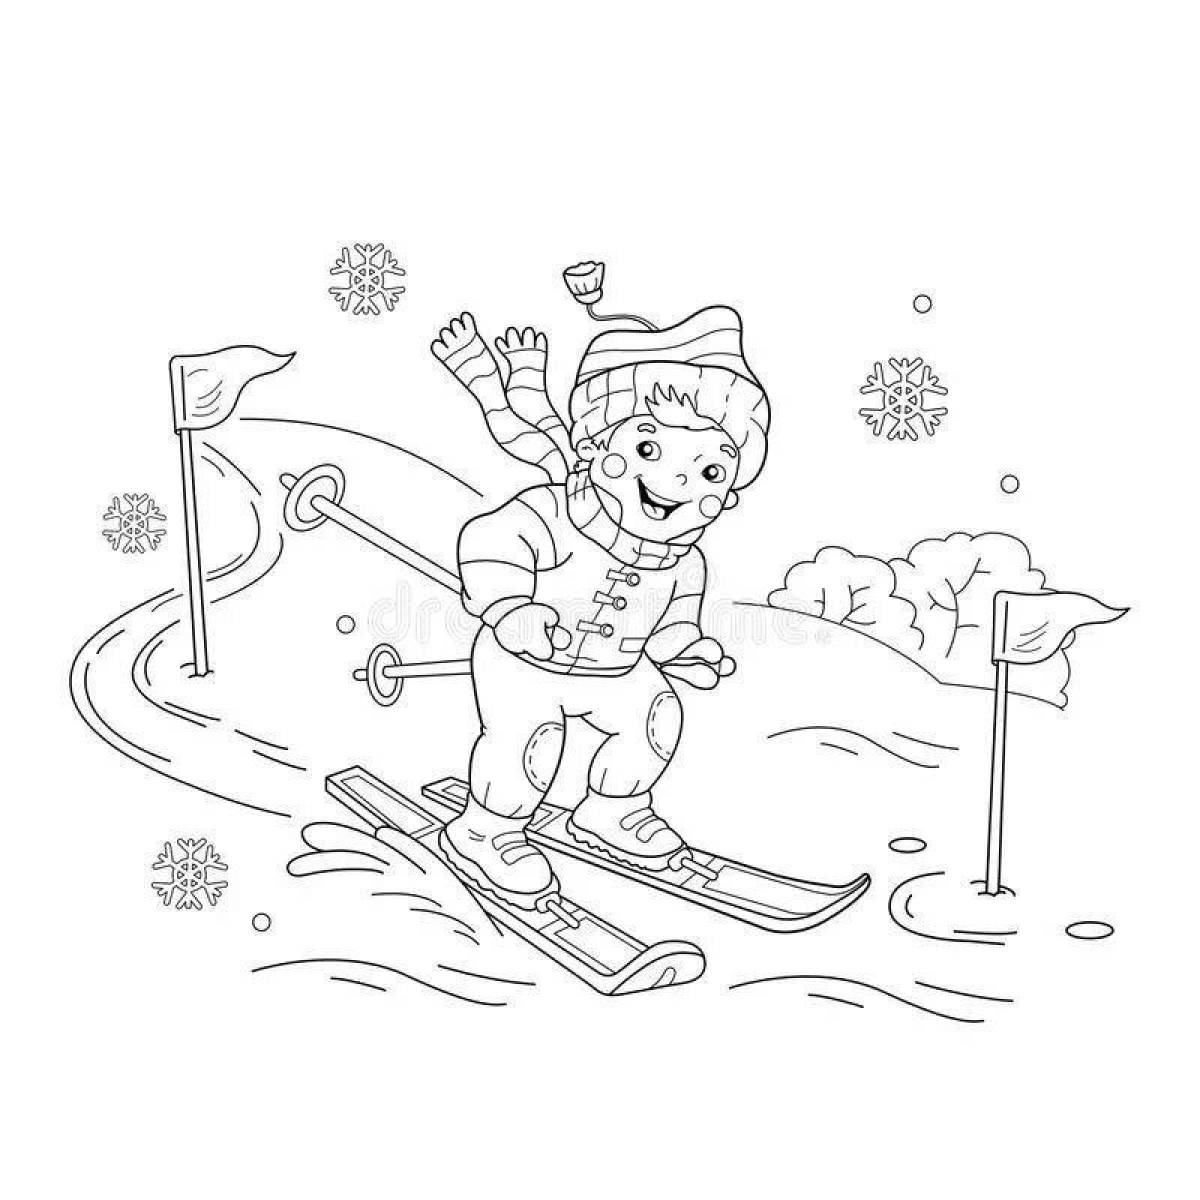 Rampant coloring book for kids winter sports